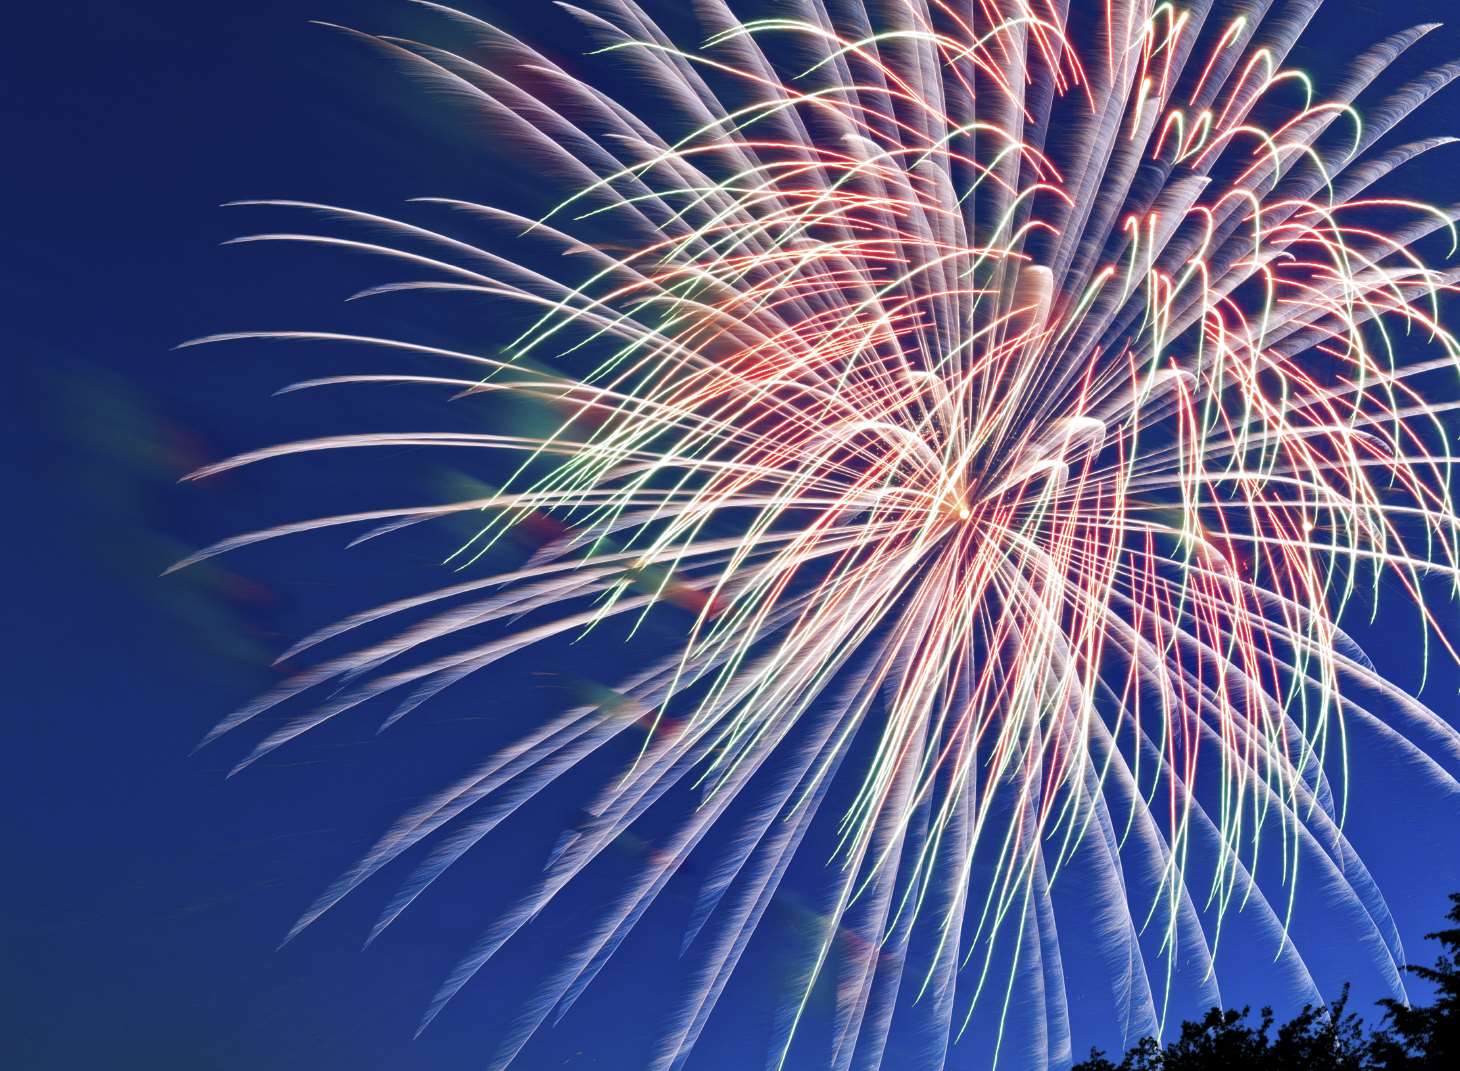 Check out a fireworks display near you